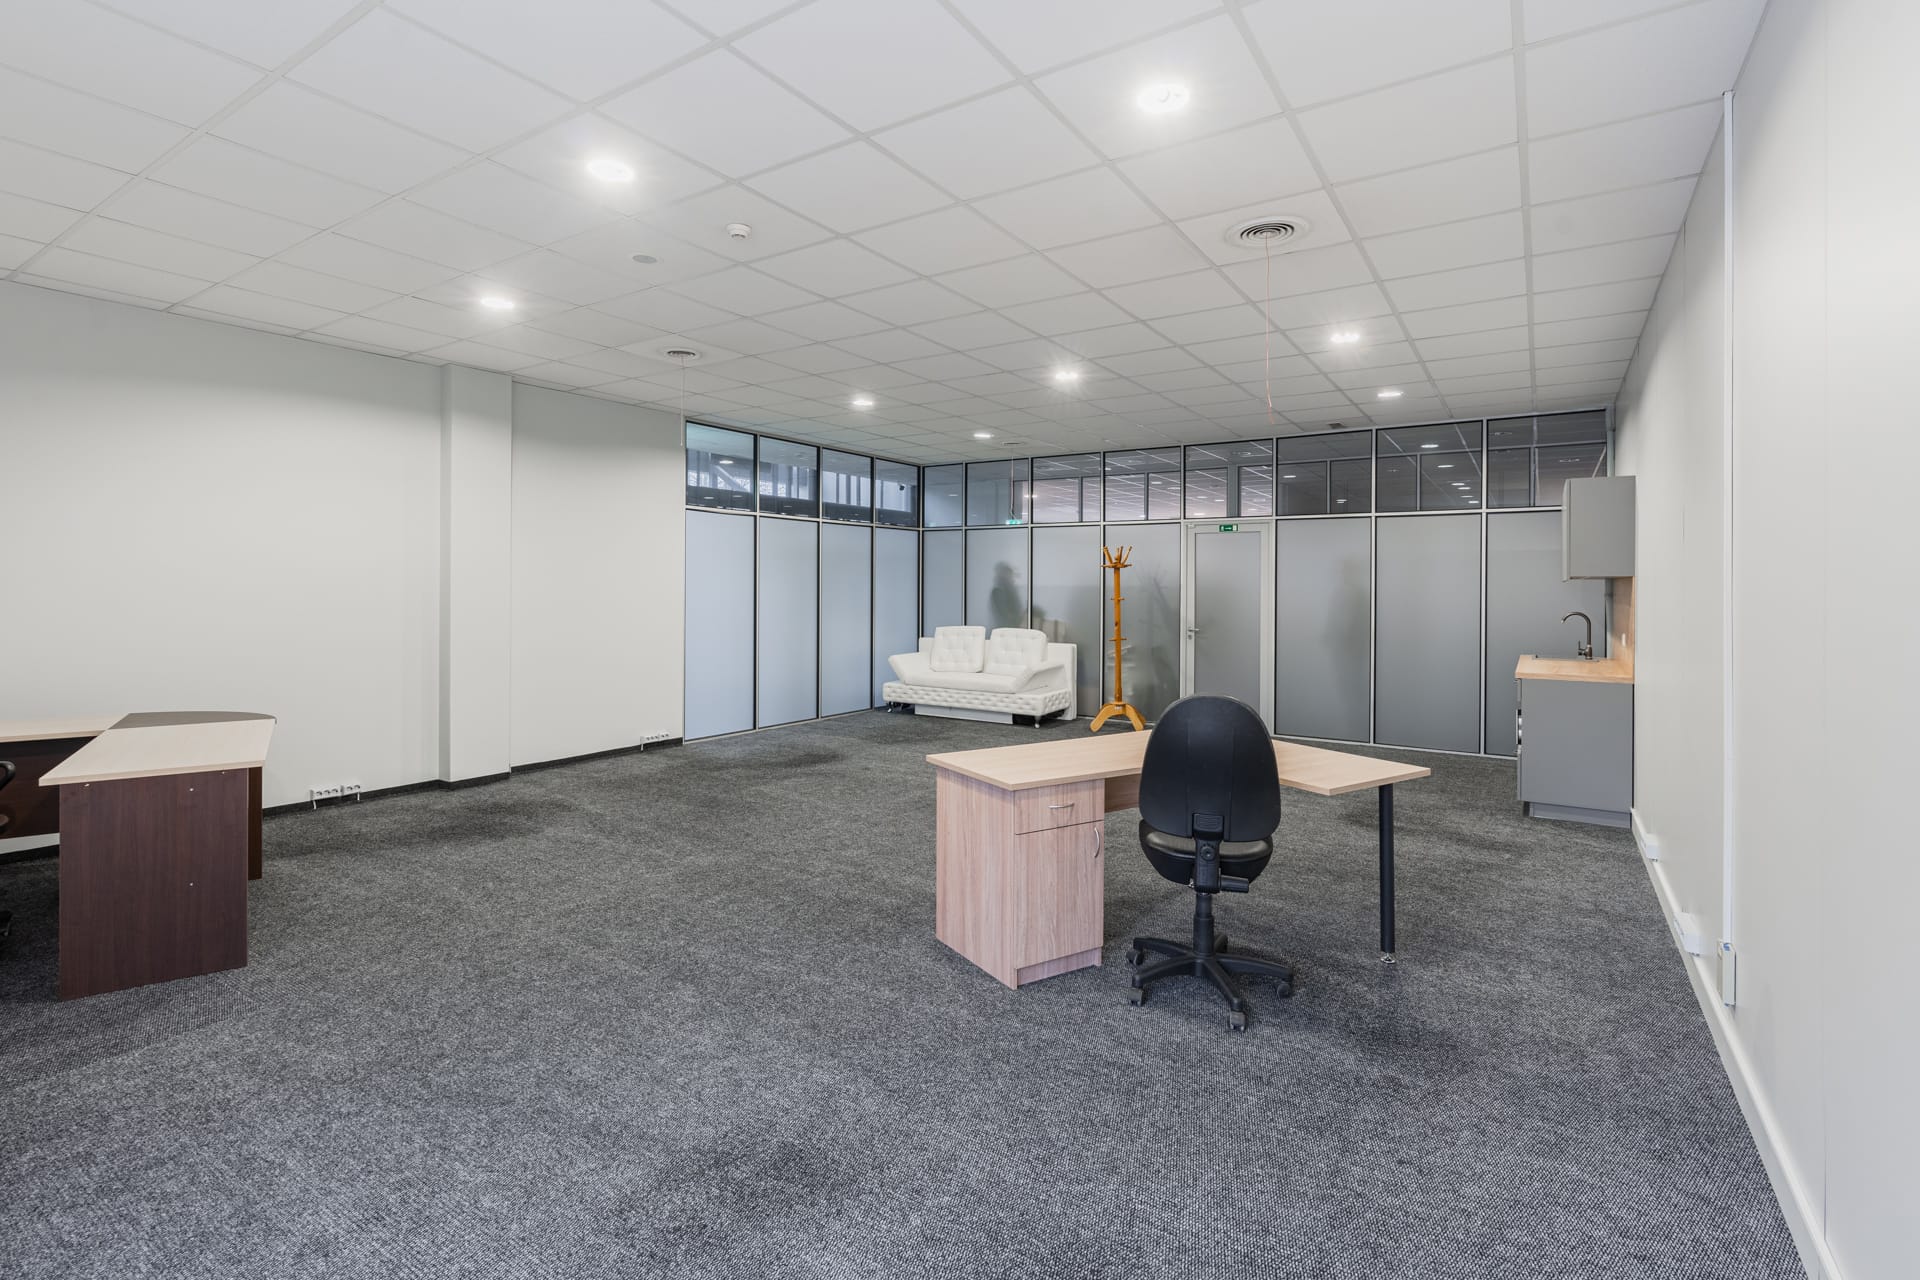 Office for rent, Raunas street - Image 1